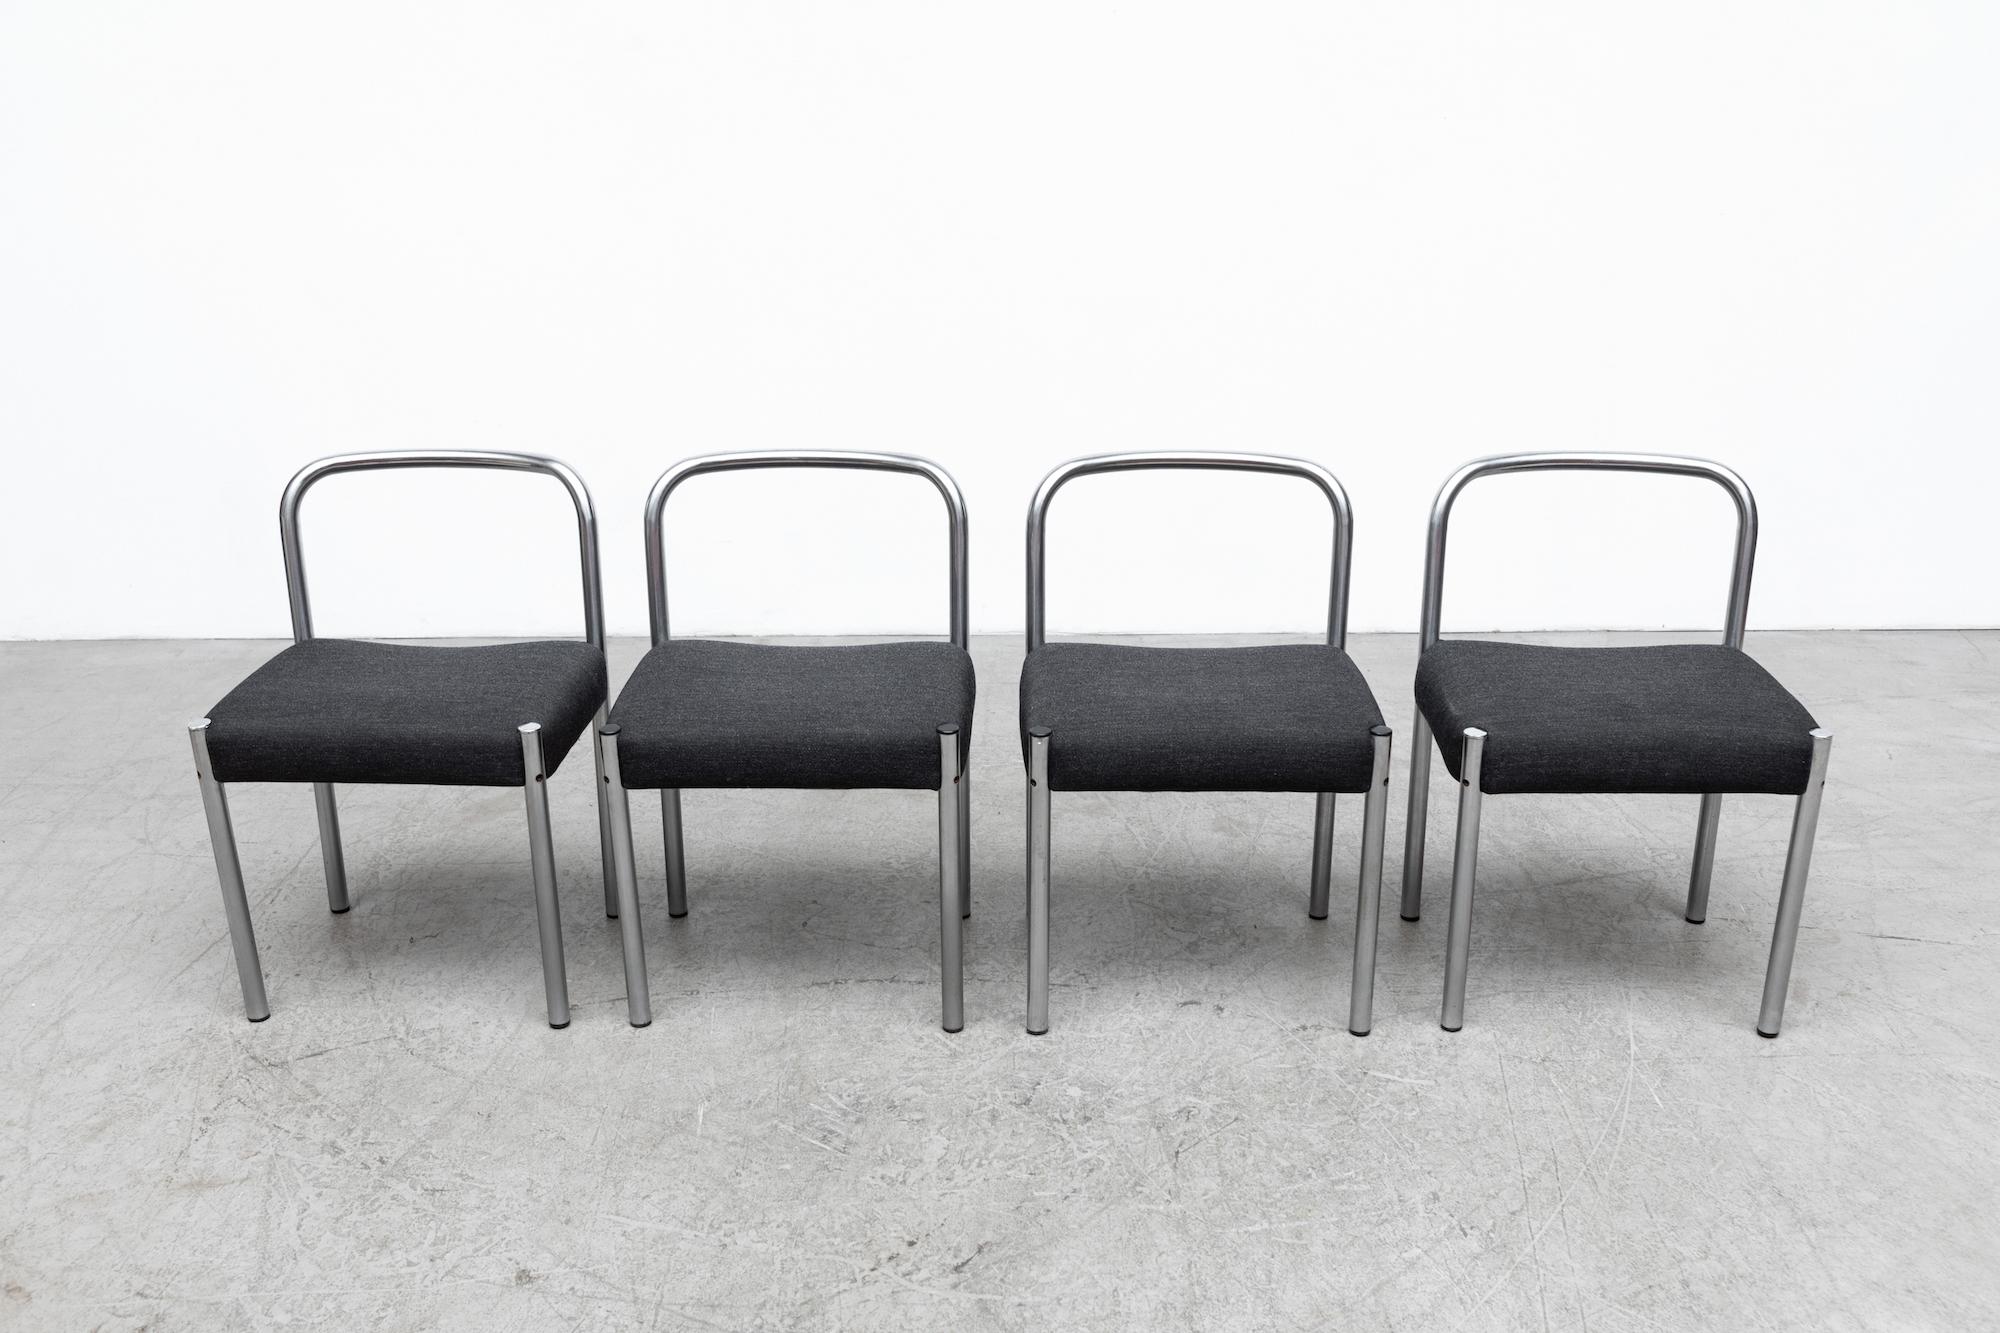 Handsome set of 4 Martin Visser, 1970's, simple modern chrome chairs with grey seating. In original condition with visible wear and patina. Wear is consistent with its age and use. Set price.